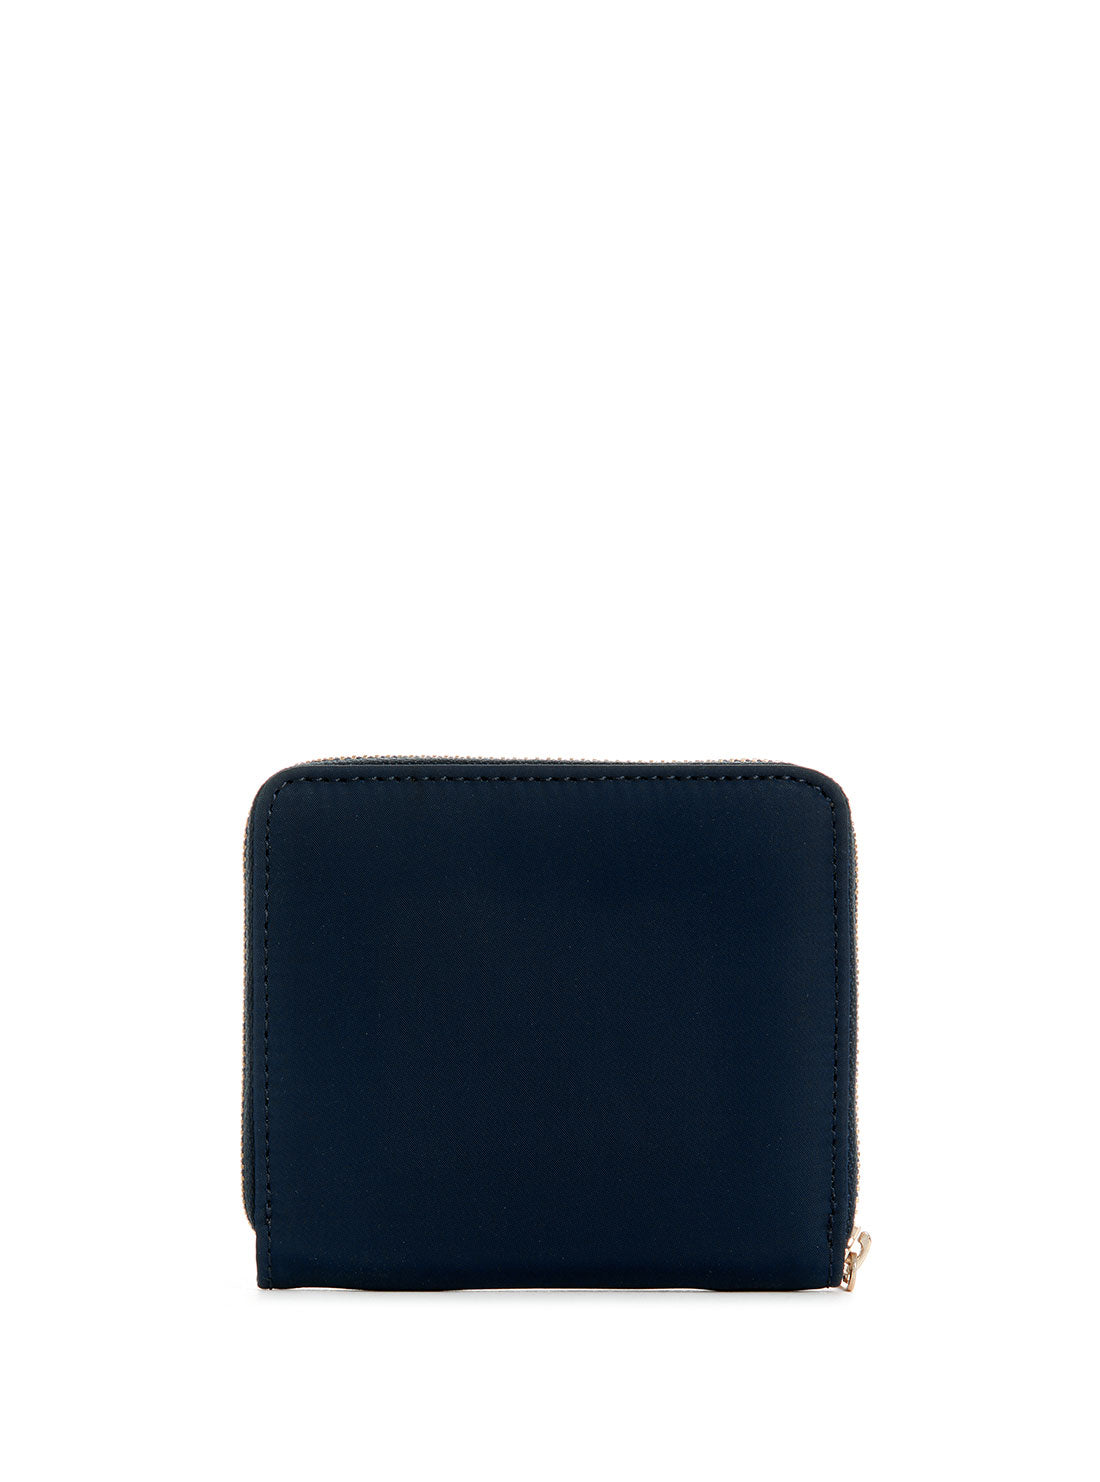 GUESS Eco Navy Gemma Small Wallet back view